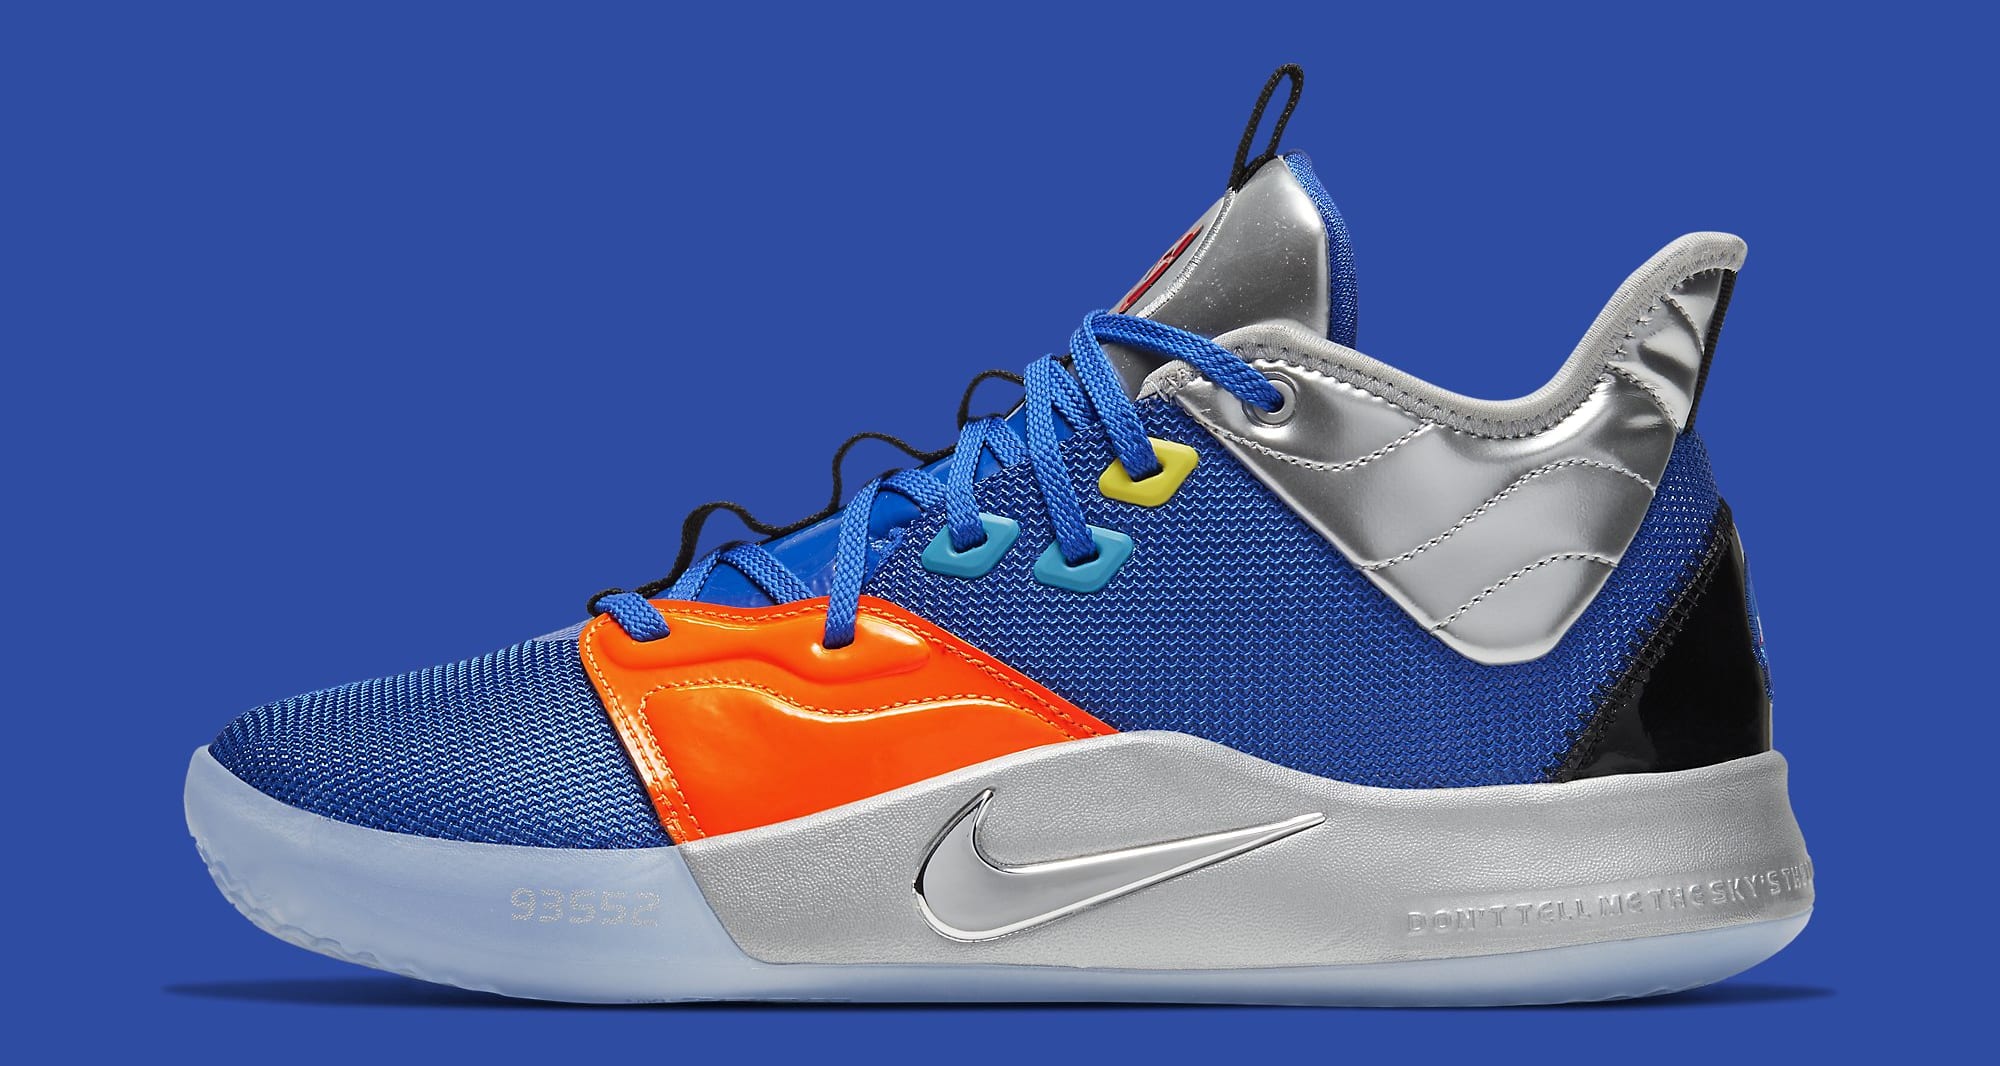 New 'NASA' Nike PG 3 For NBA's Opening Night | Complex